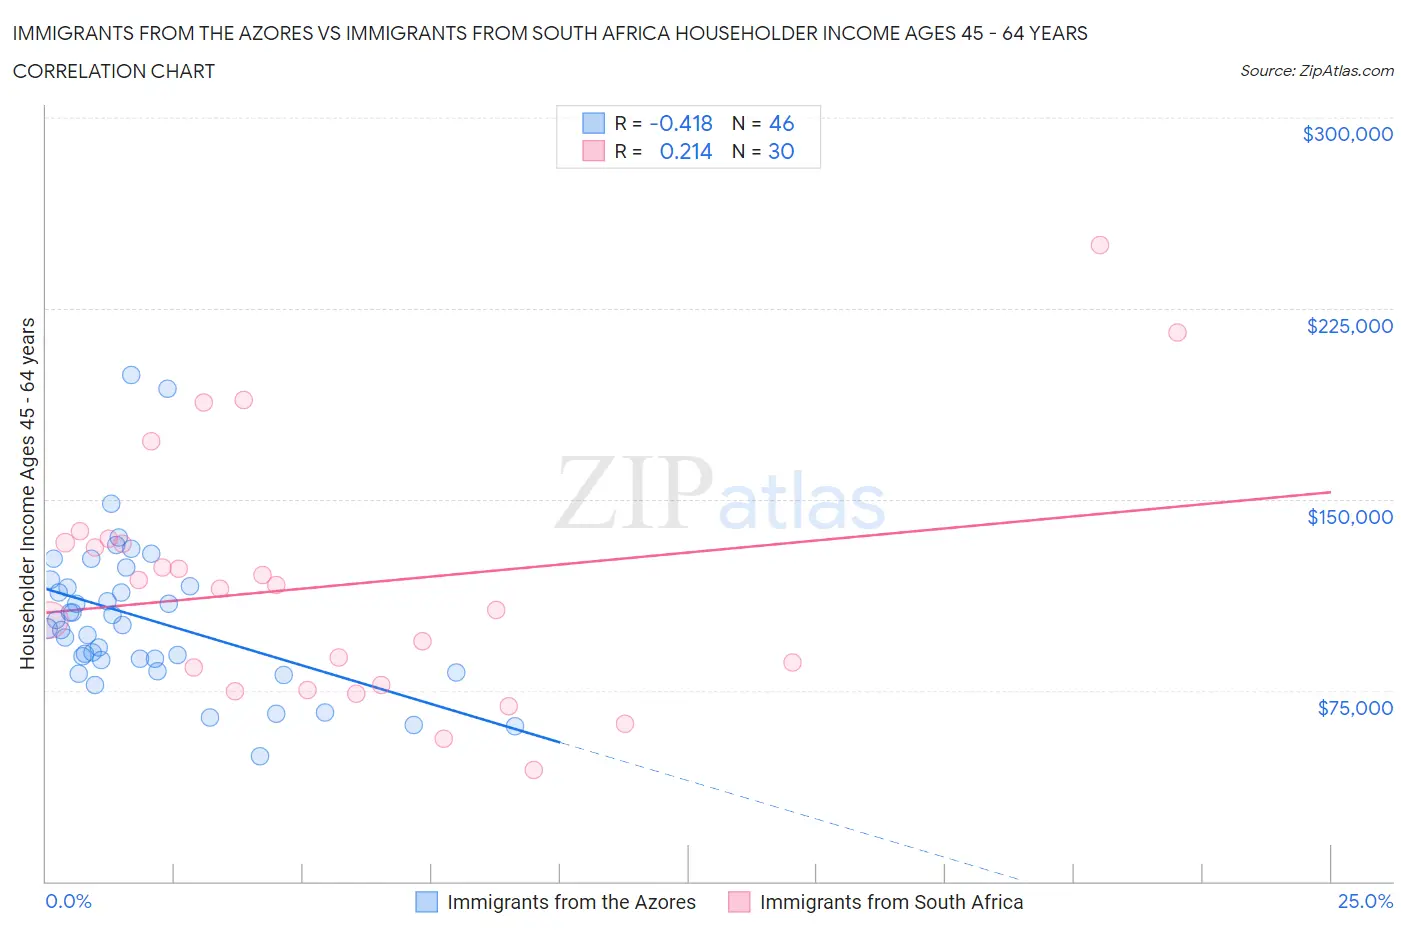 Immigrants from the Azores vs Immigrants from South Africa Householder Income Ages 45 - 64 years